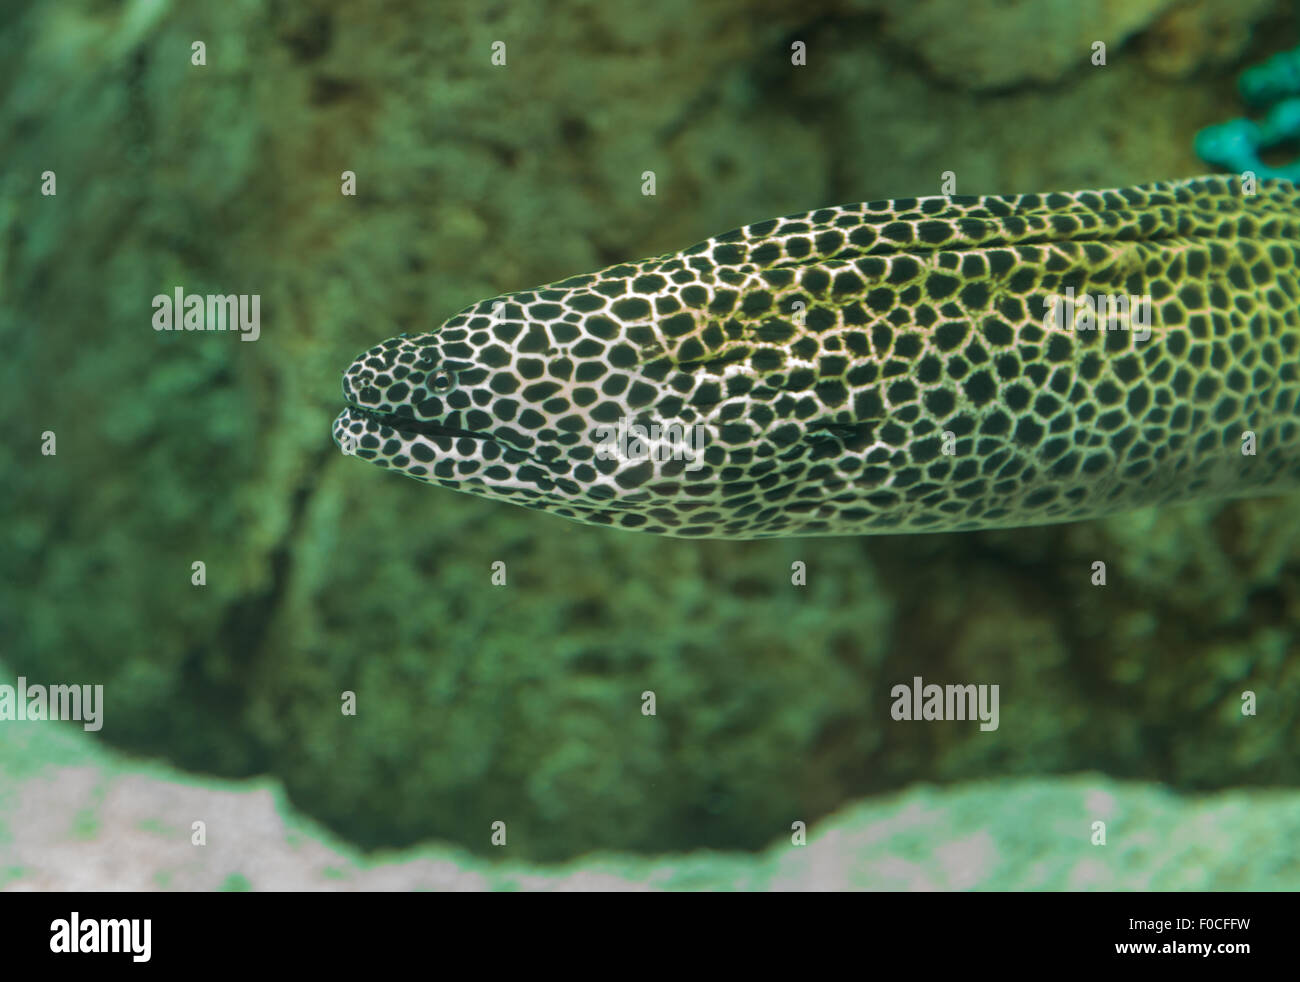 Leopard moray eel, Enchelycore pardalis, has spotted skin Stock Photo